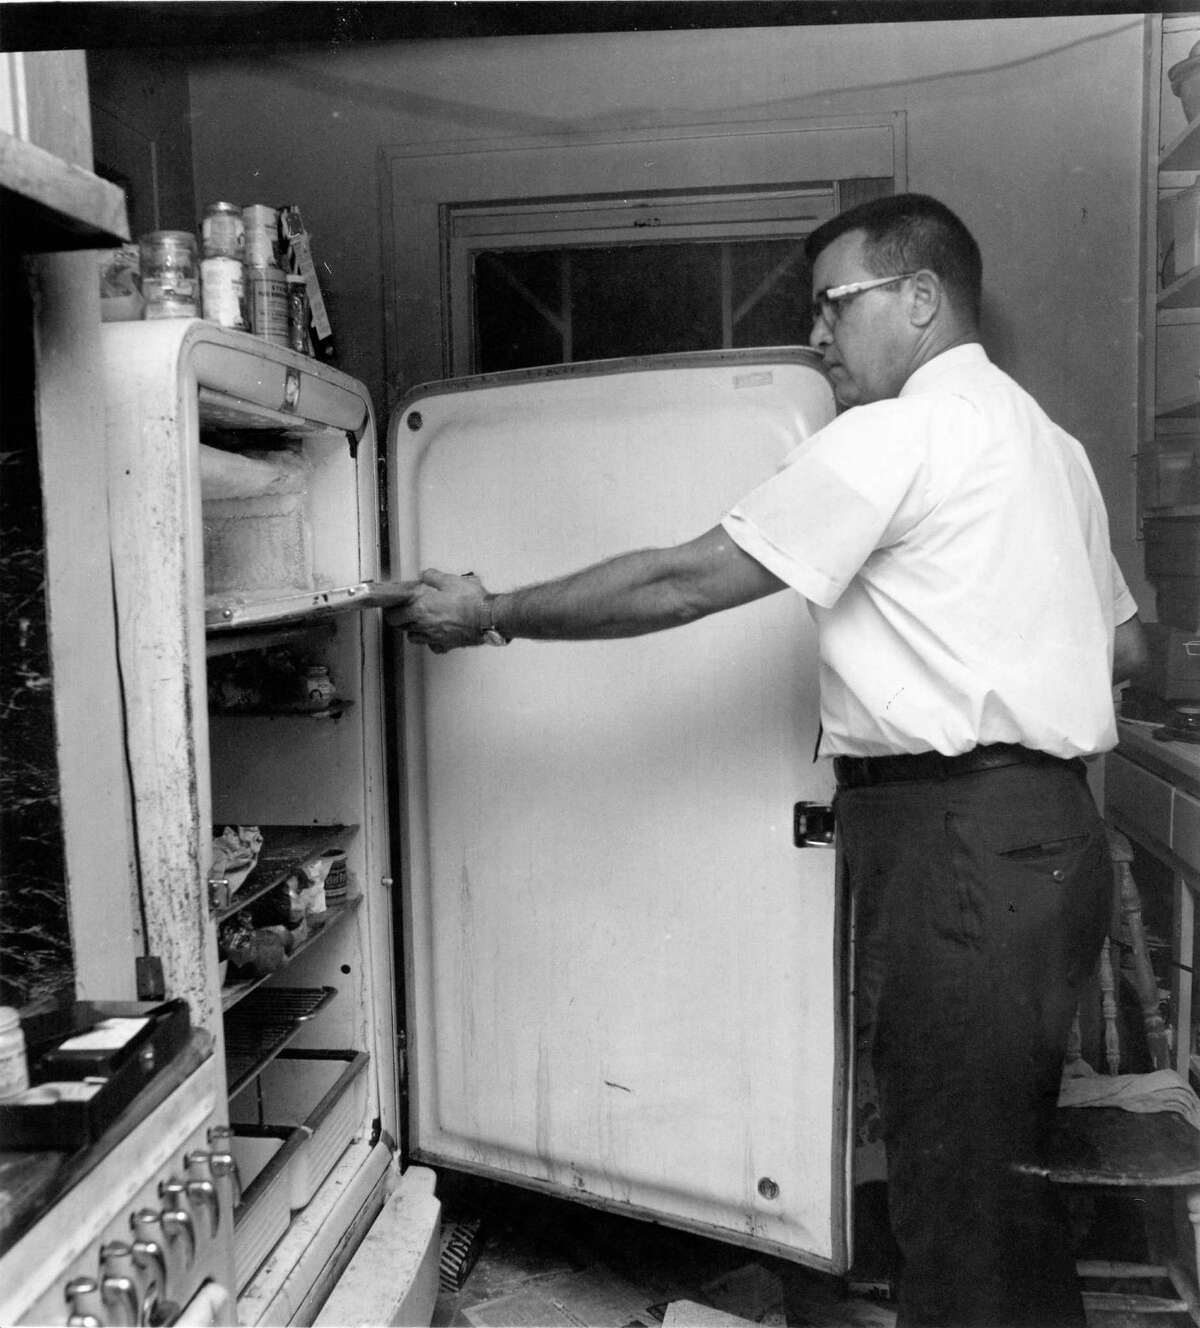 Houston Police homicide detective J.P. Paulk examines the freezer compartment of a refrigerator where a torso was found. Fred C. Rogers, 81, and his wife, Edwina Harmon Rogers, 79, were found dismembered in their refrigerator at 1815 Driscoll on June 23, 1965.